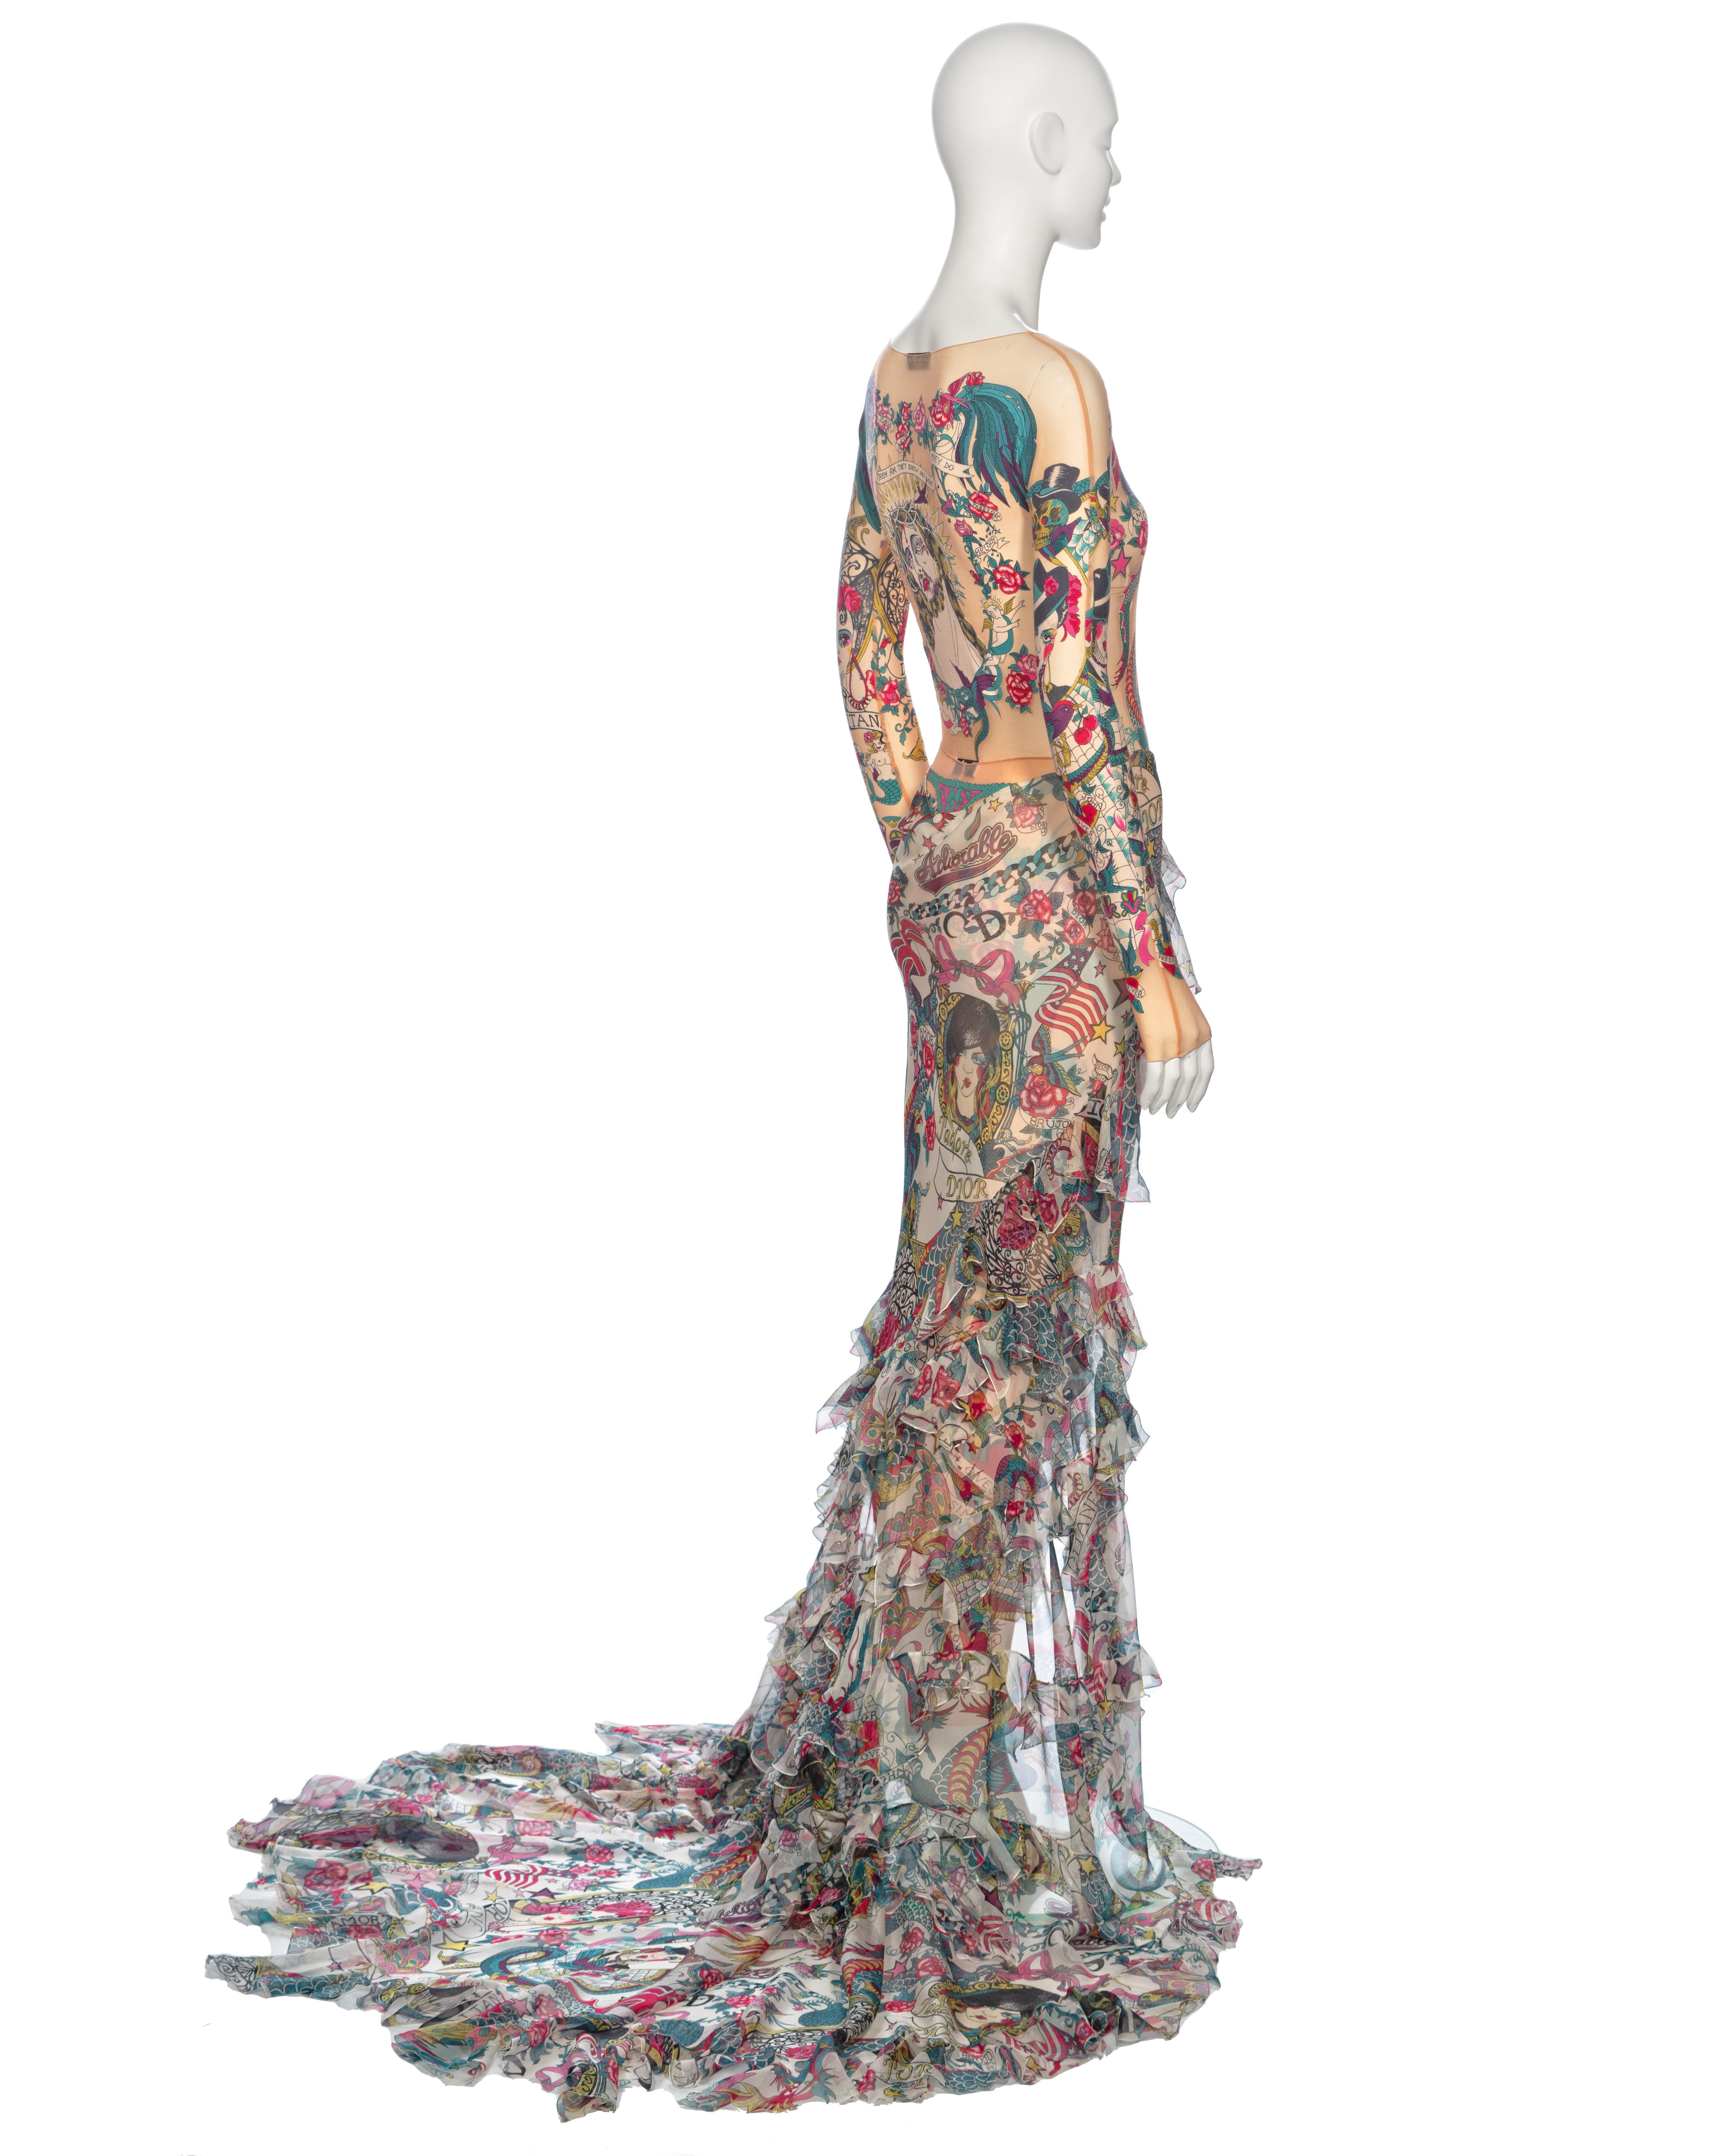 Christian Dior by John Galliano Tattoo Print Body, Leggings and Skirt, ss 2004 For Sale 6